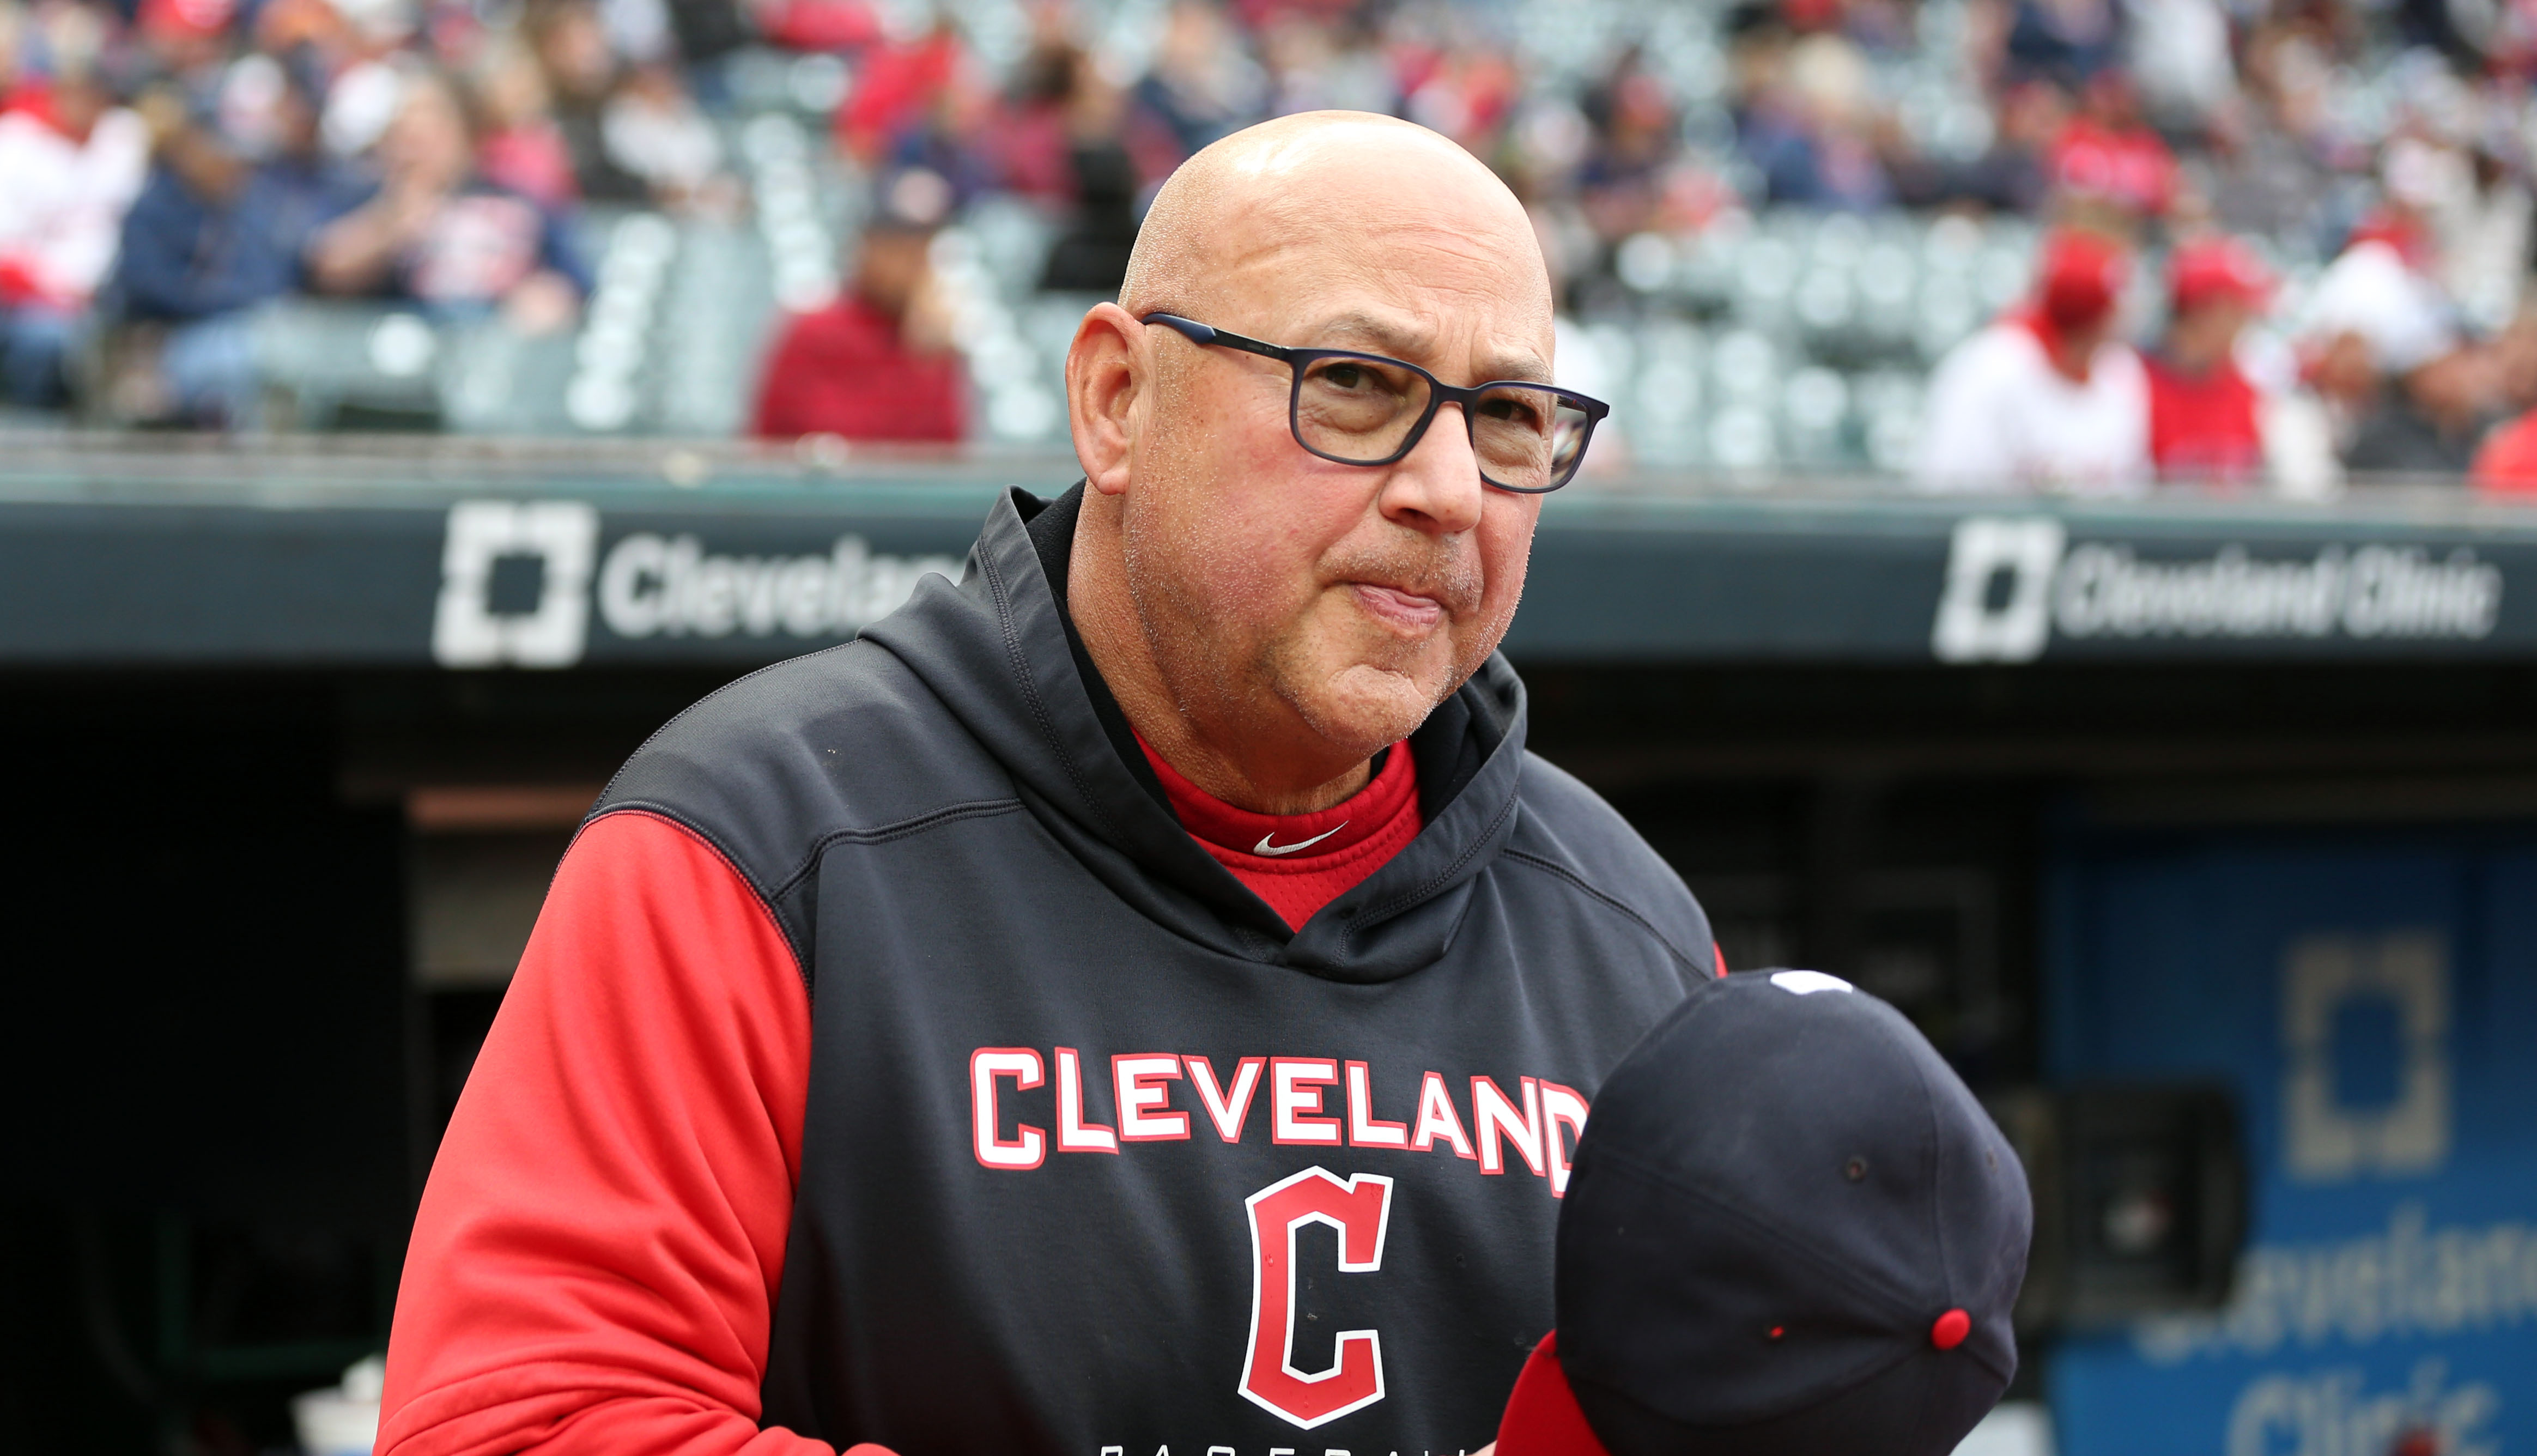 Guardians: One of the game's characters, manager Terry Francona set to end  a career defined by class, winning and caring